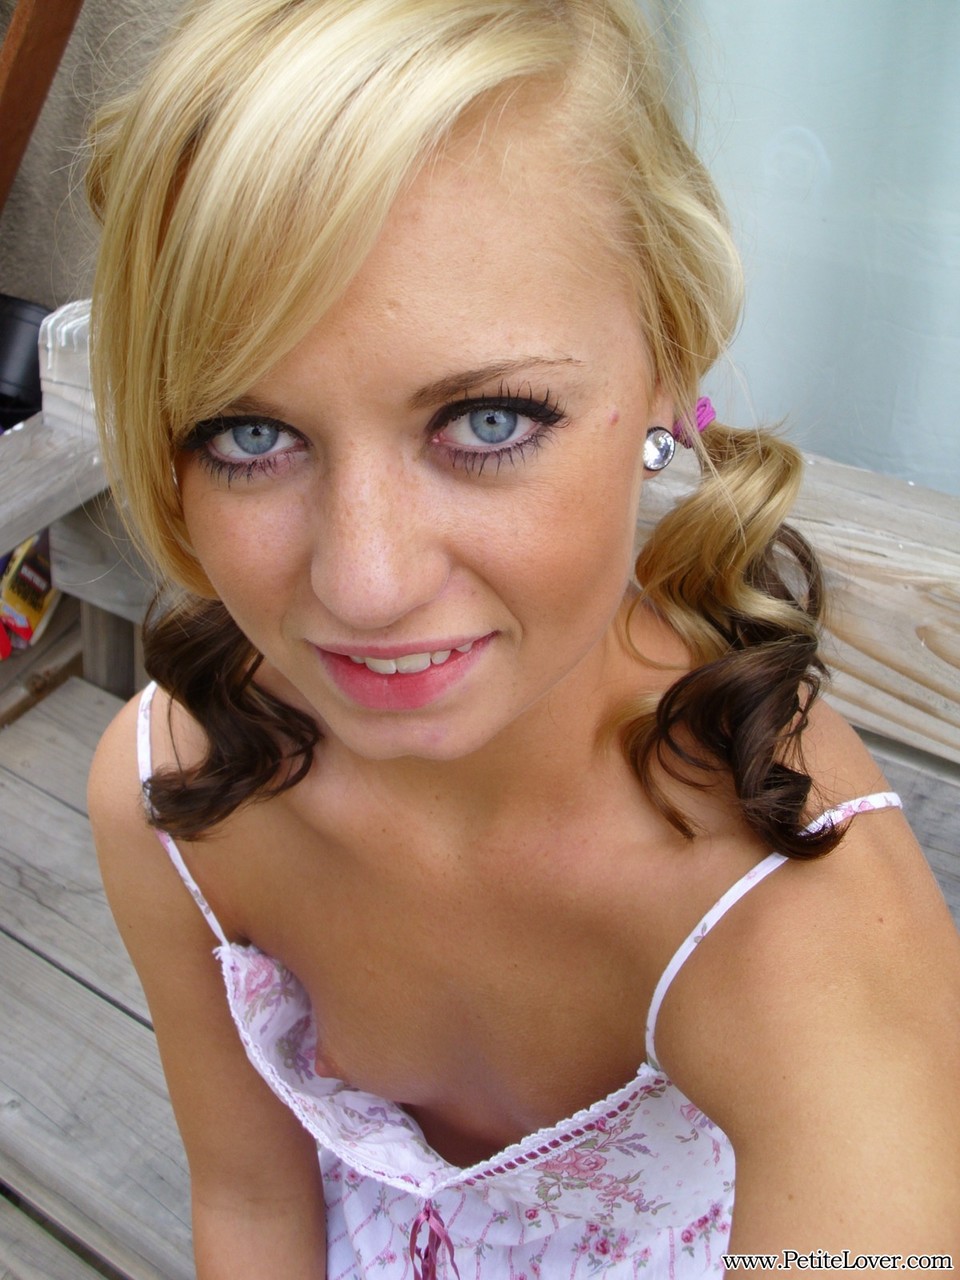 Cute blonde Tiff in pigtails showing off her wee small tits & tiny bald pussy foto pornográfica #428478636 | Petite Lover Pics, Tiff, Amateur, pornografia móvel